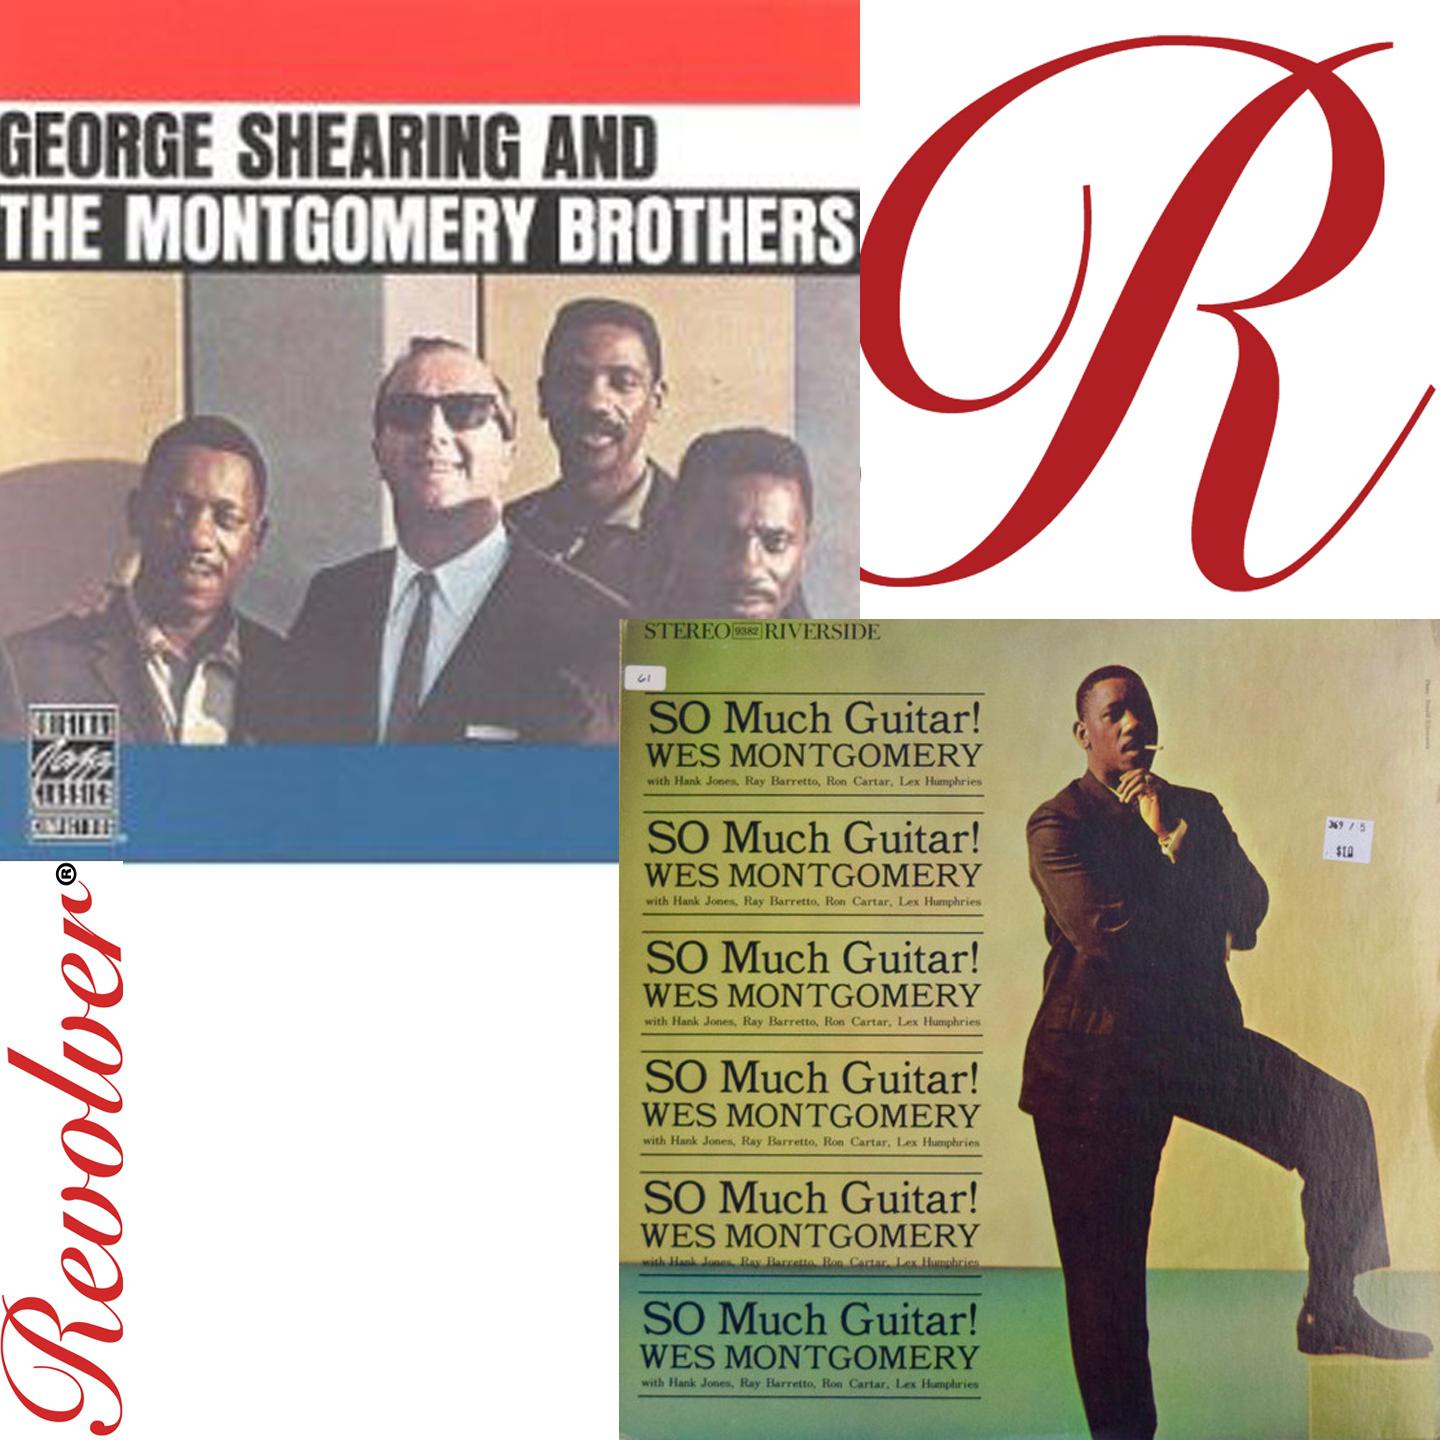 So Much Guitar and George Shearing and the Montgomery Brothers